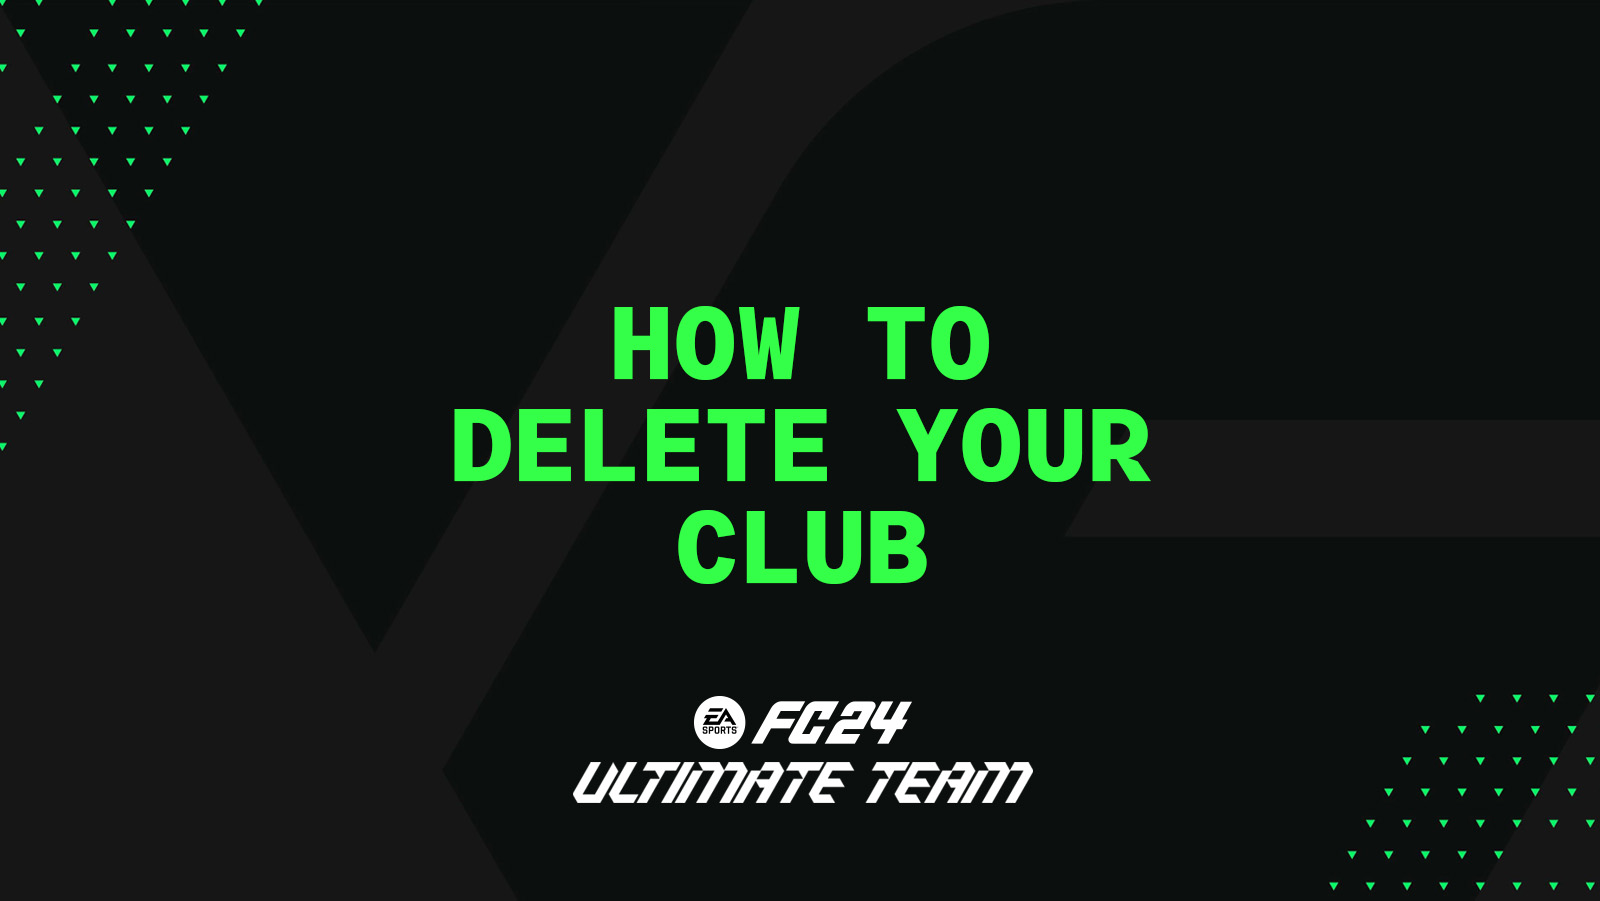 FC 24 Ultimate Team – How to Delete your Club